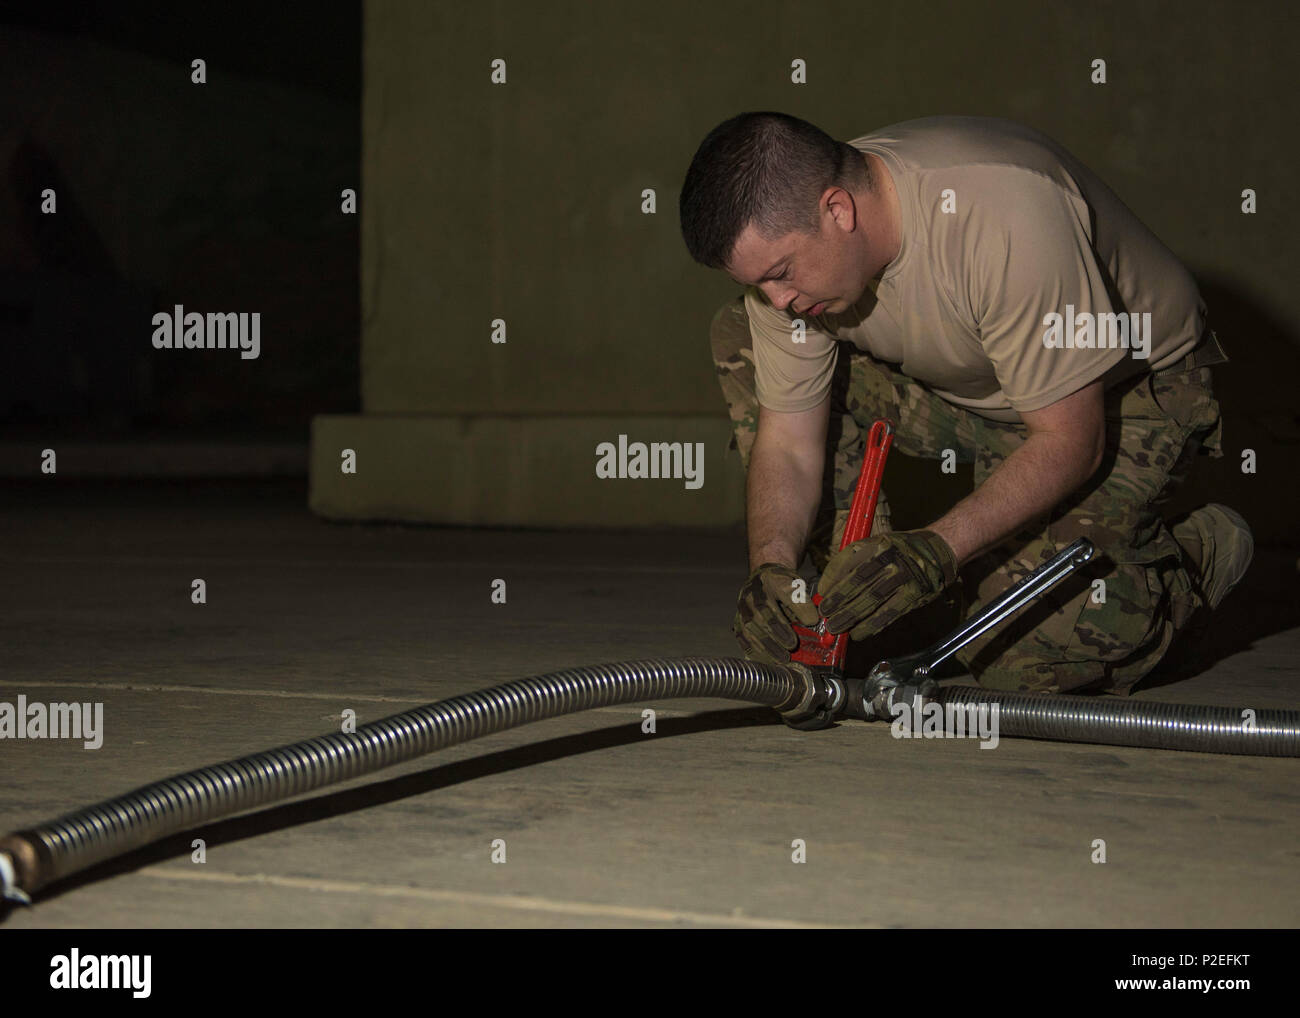 Staff Sgt. Nathan Knight, 455th Expeditionary Logistics Readiness Squadron cryogenics supervisor, adjusts a liquid oxygen tank hose, Bagram Airfield, Afghanistan, Sept. 14, 2016. The liquid oxygen tanks are supplied through the 379th ELRS at Al Udeid Air Base, Qatar. Once the oxygen is restored back into aircraft, the tanks are reconstructed and send back to Al Udeid for refill and reuse. (U.S. Air Force photo by Senior Airman Justyn M. Freeman) Stock Photo